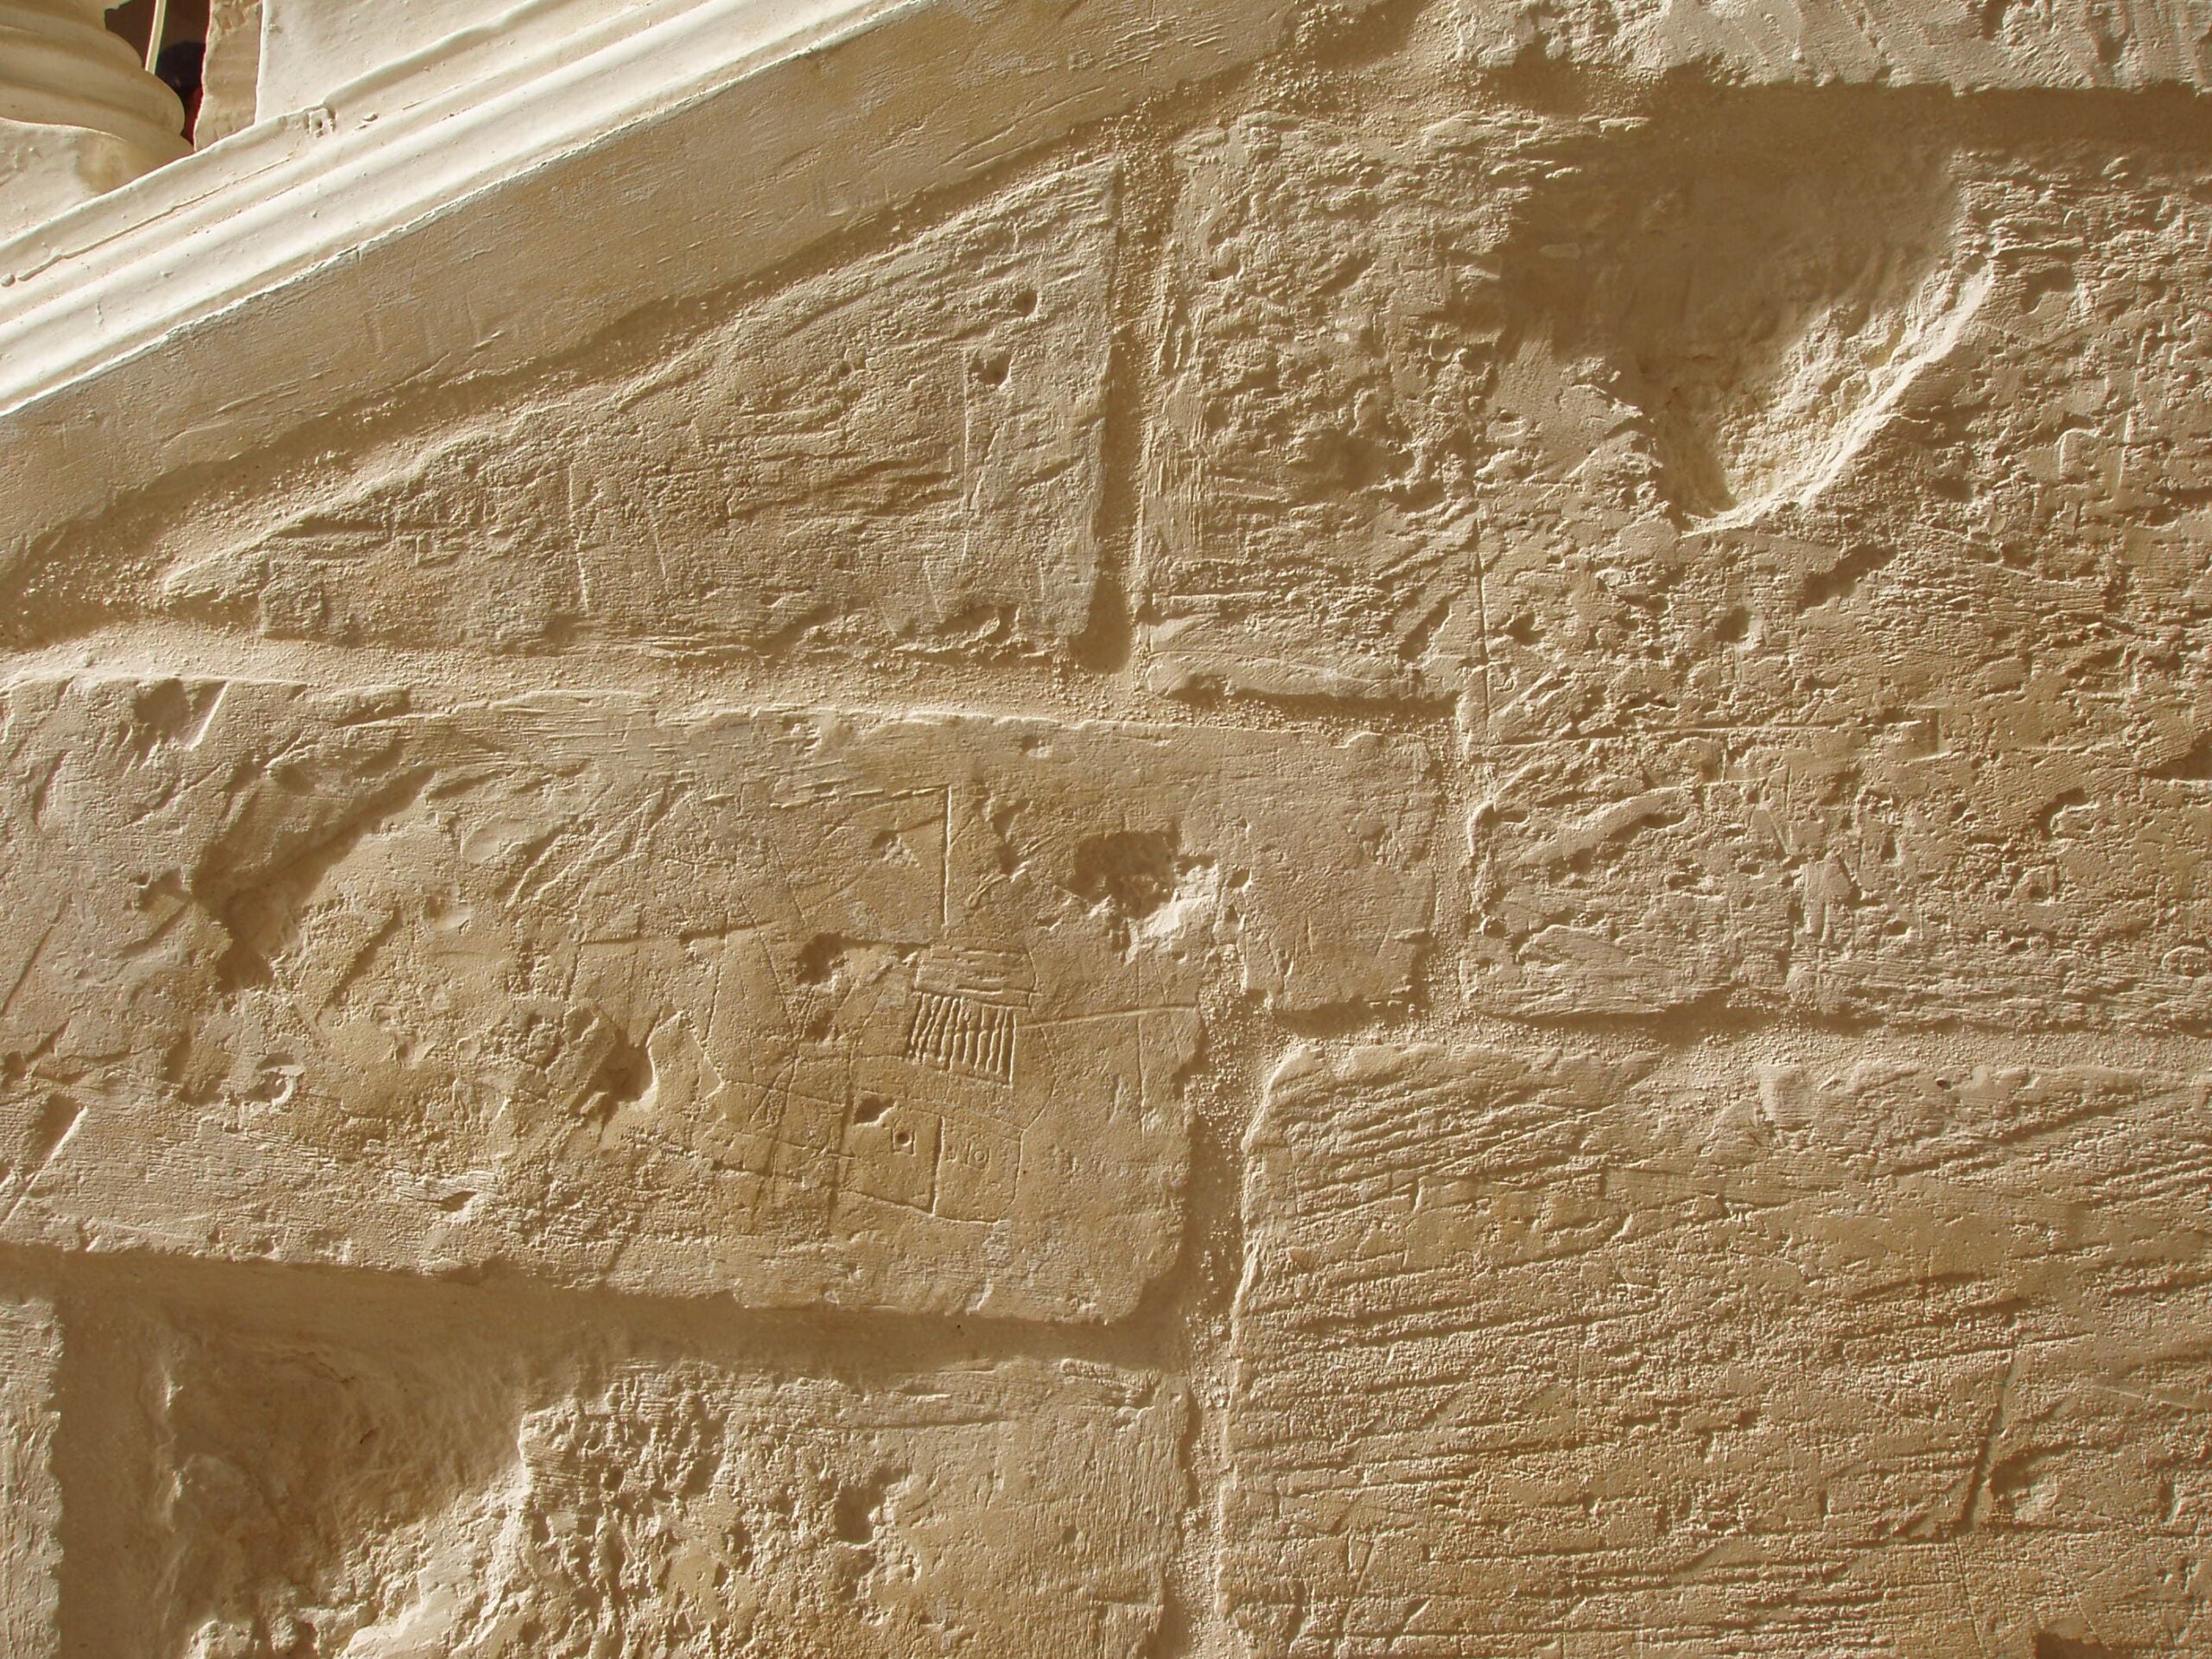 This example of a ship graffito is partially hidden due to works carried out on the stone. The decorated stern is visible together with a flag and two cannon ports.